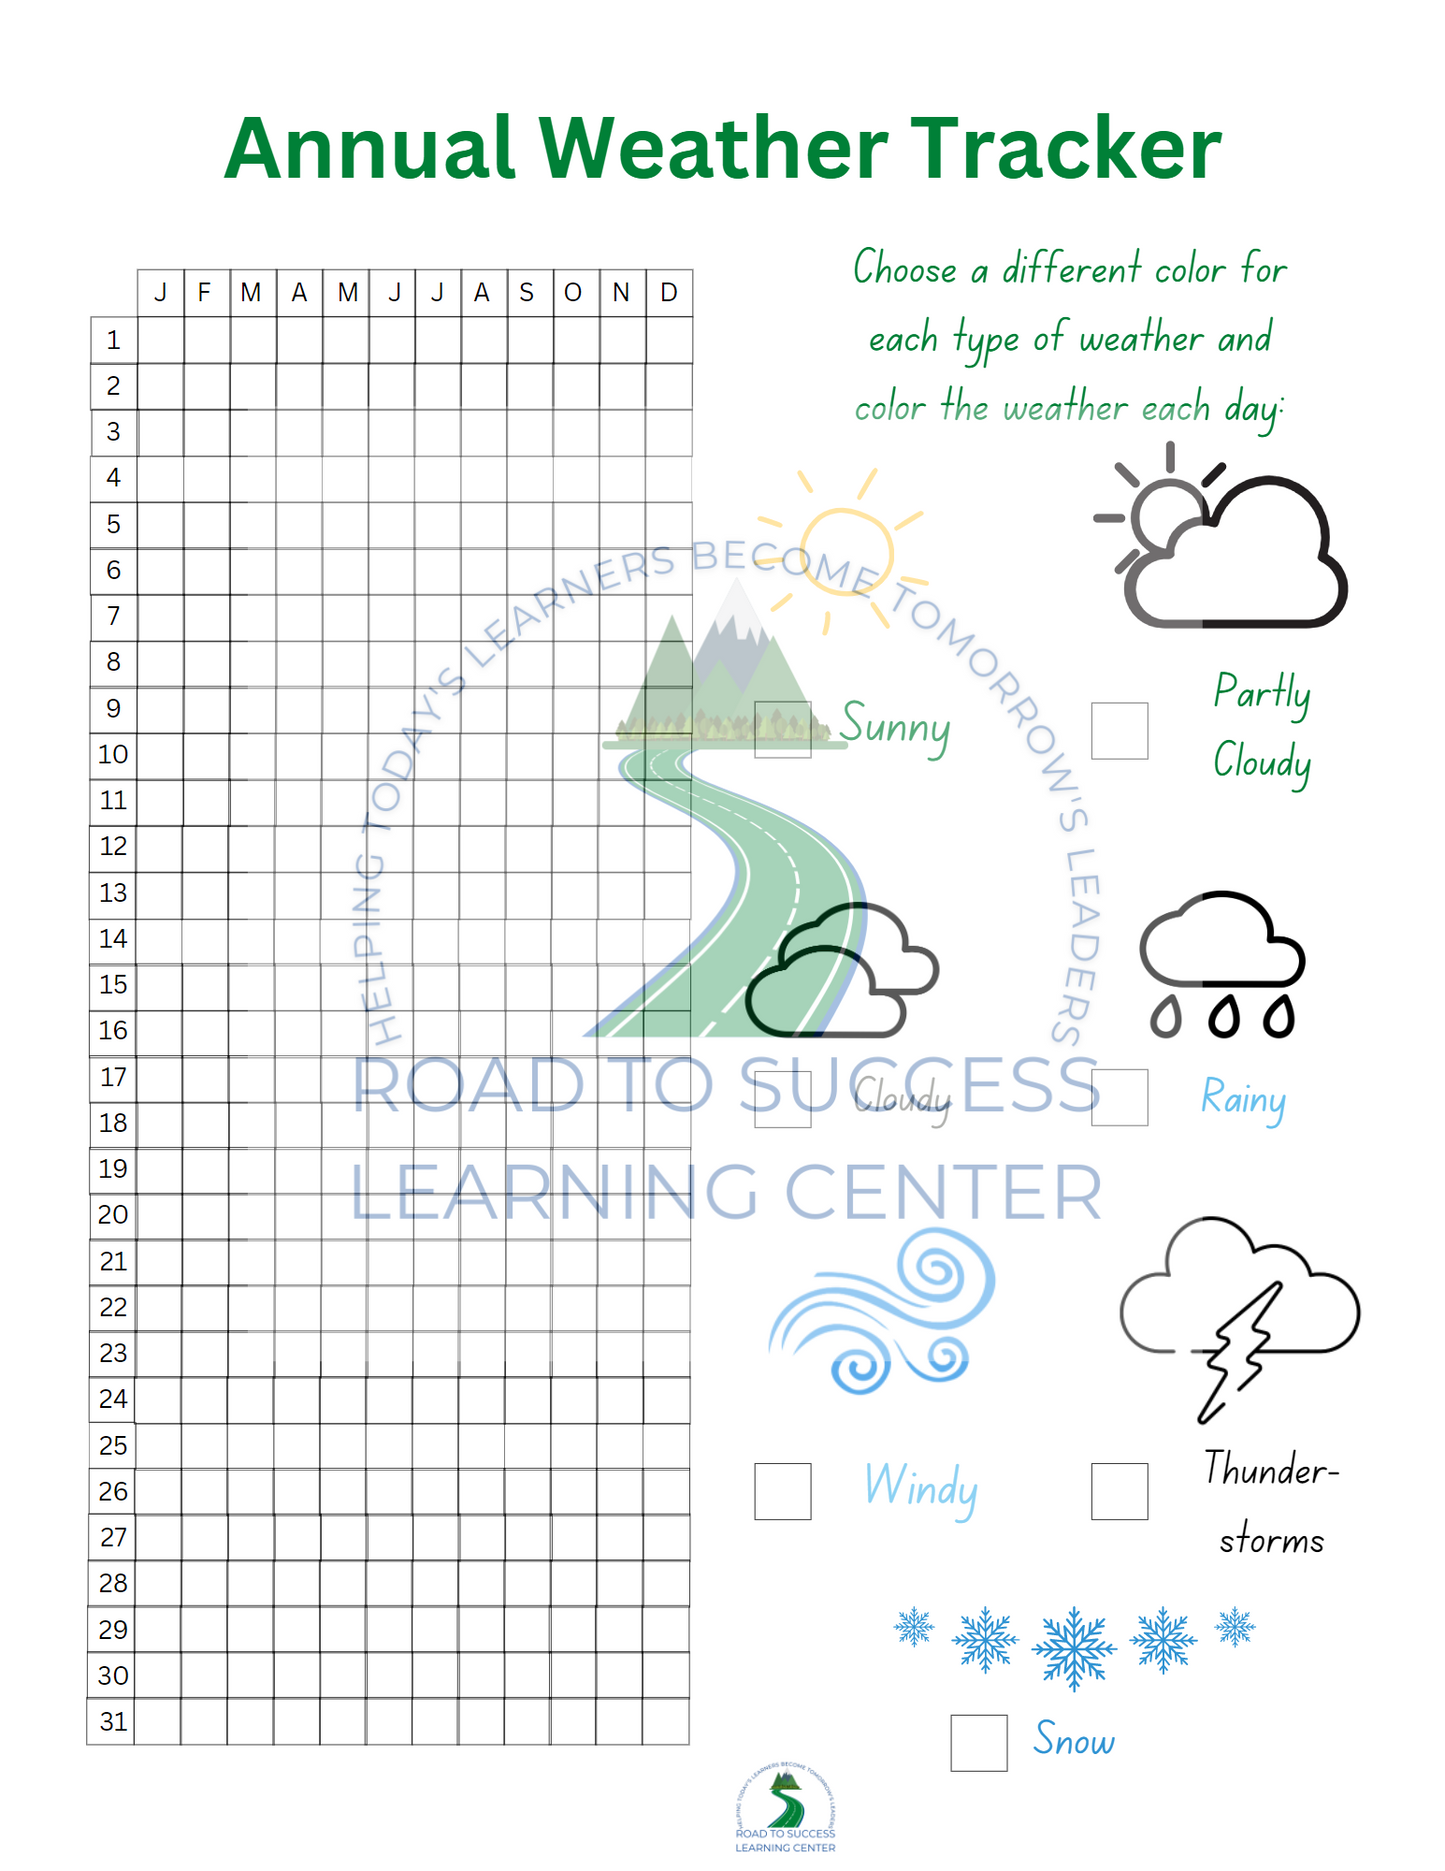 All About Weather Workbook